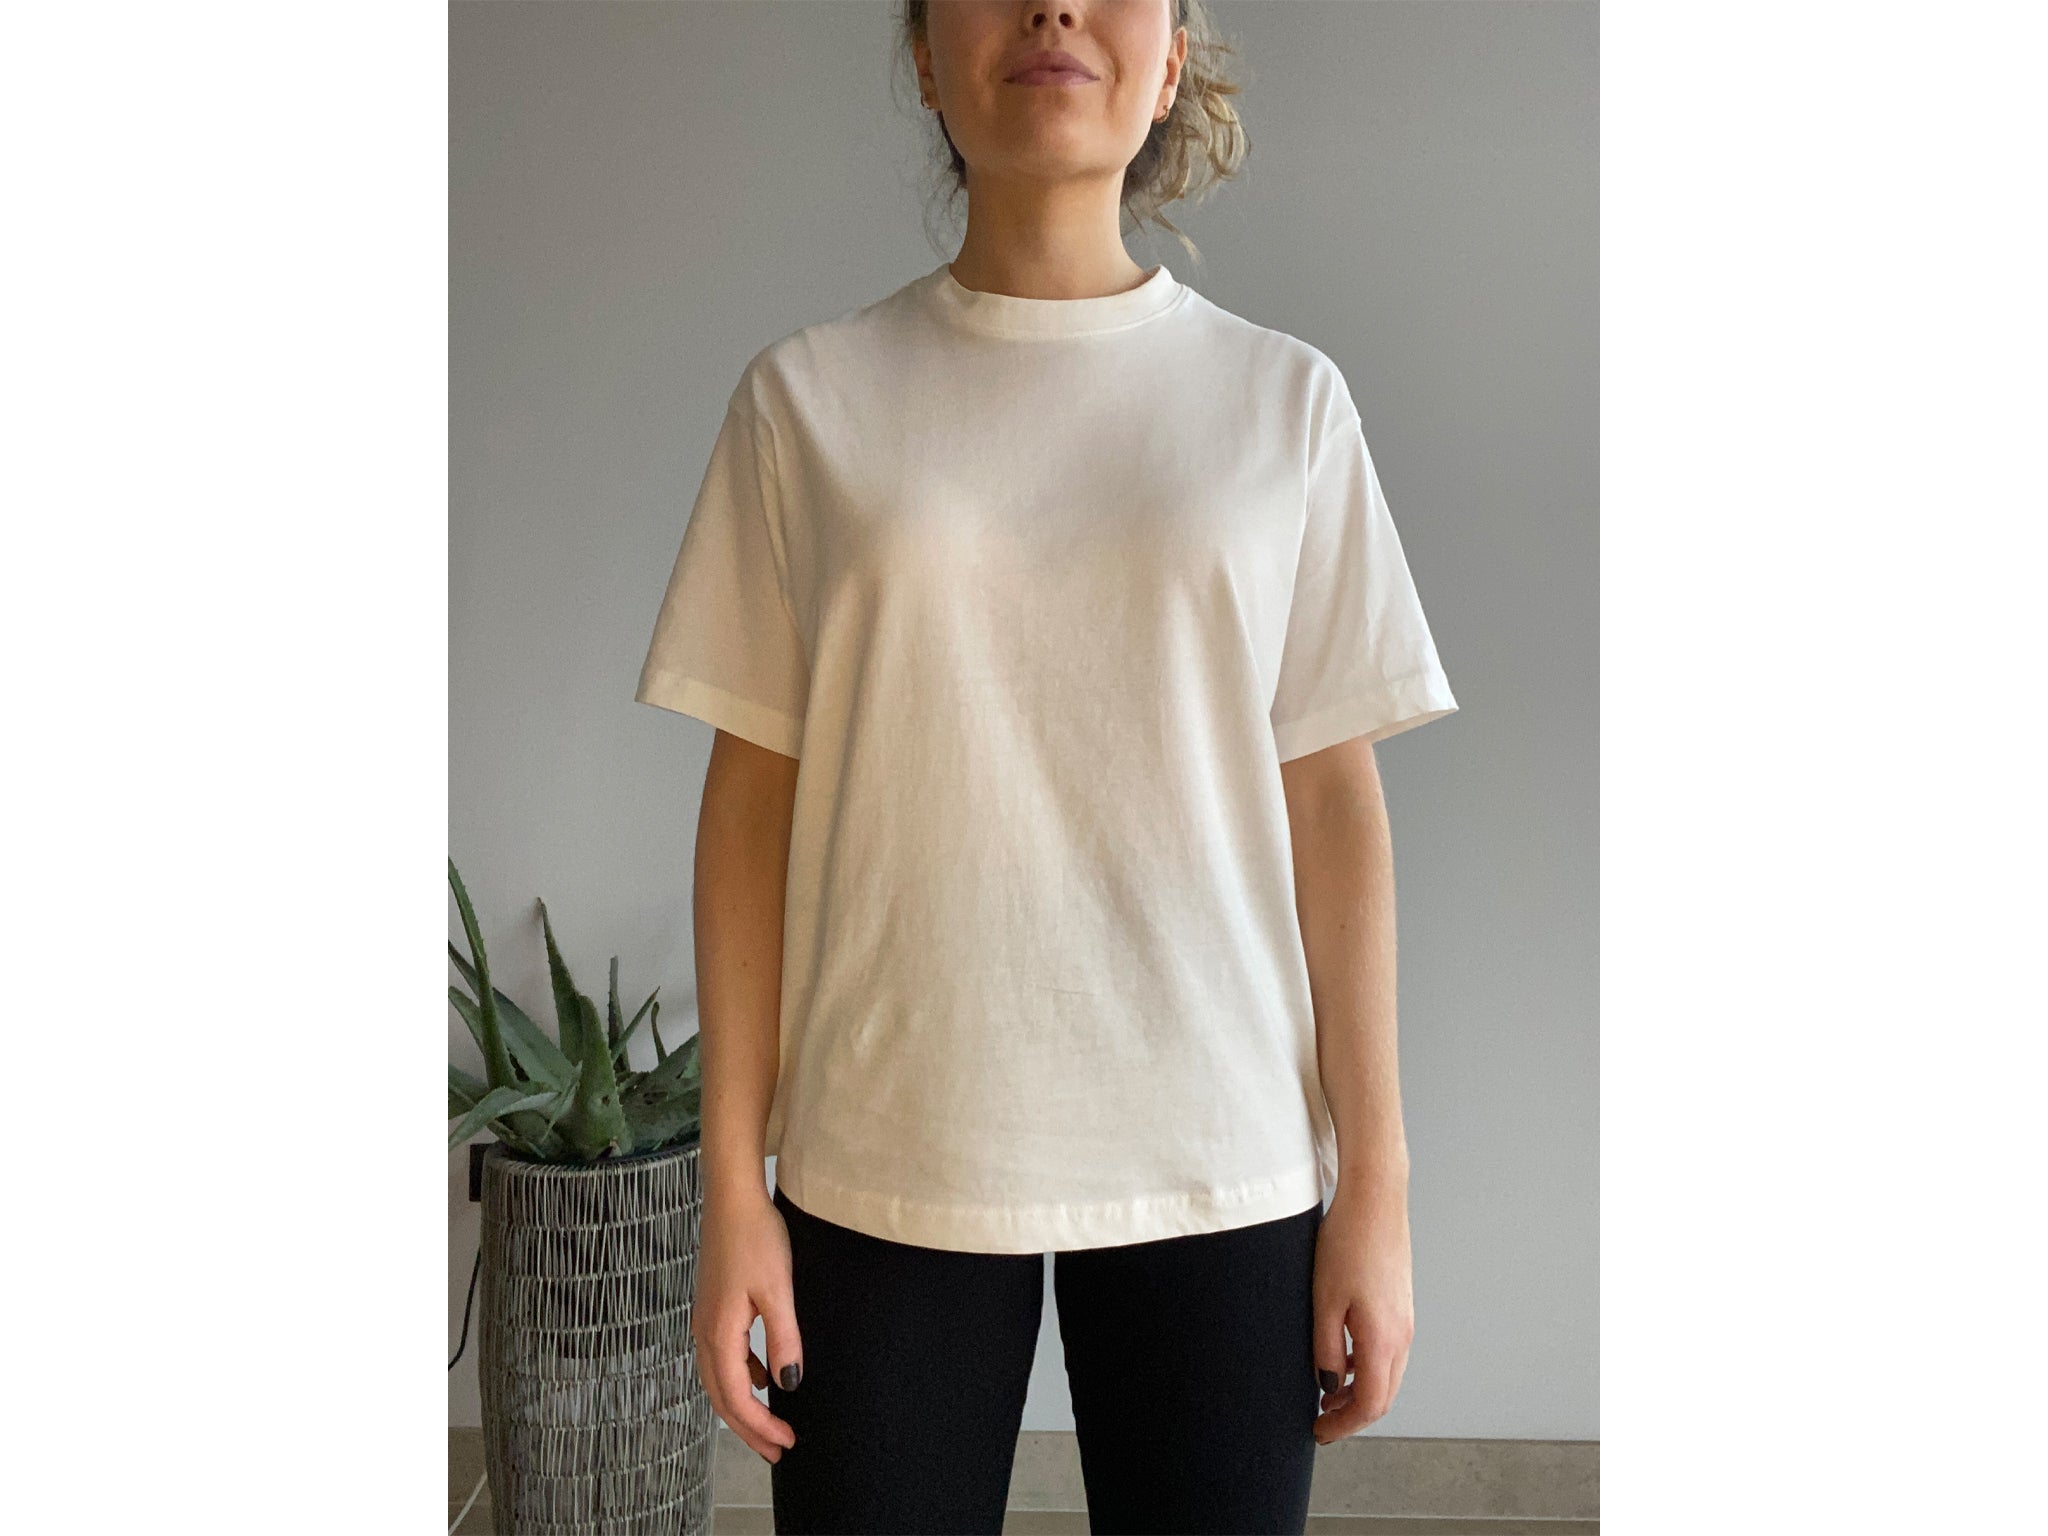 Best white T-shirt women 2022: Gap, H&M, Next, M&S and more | The